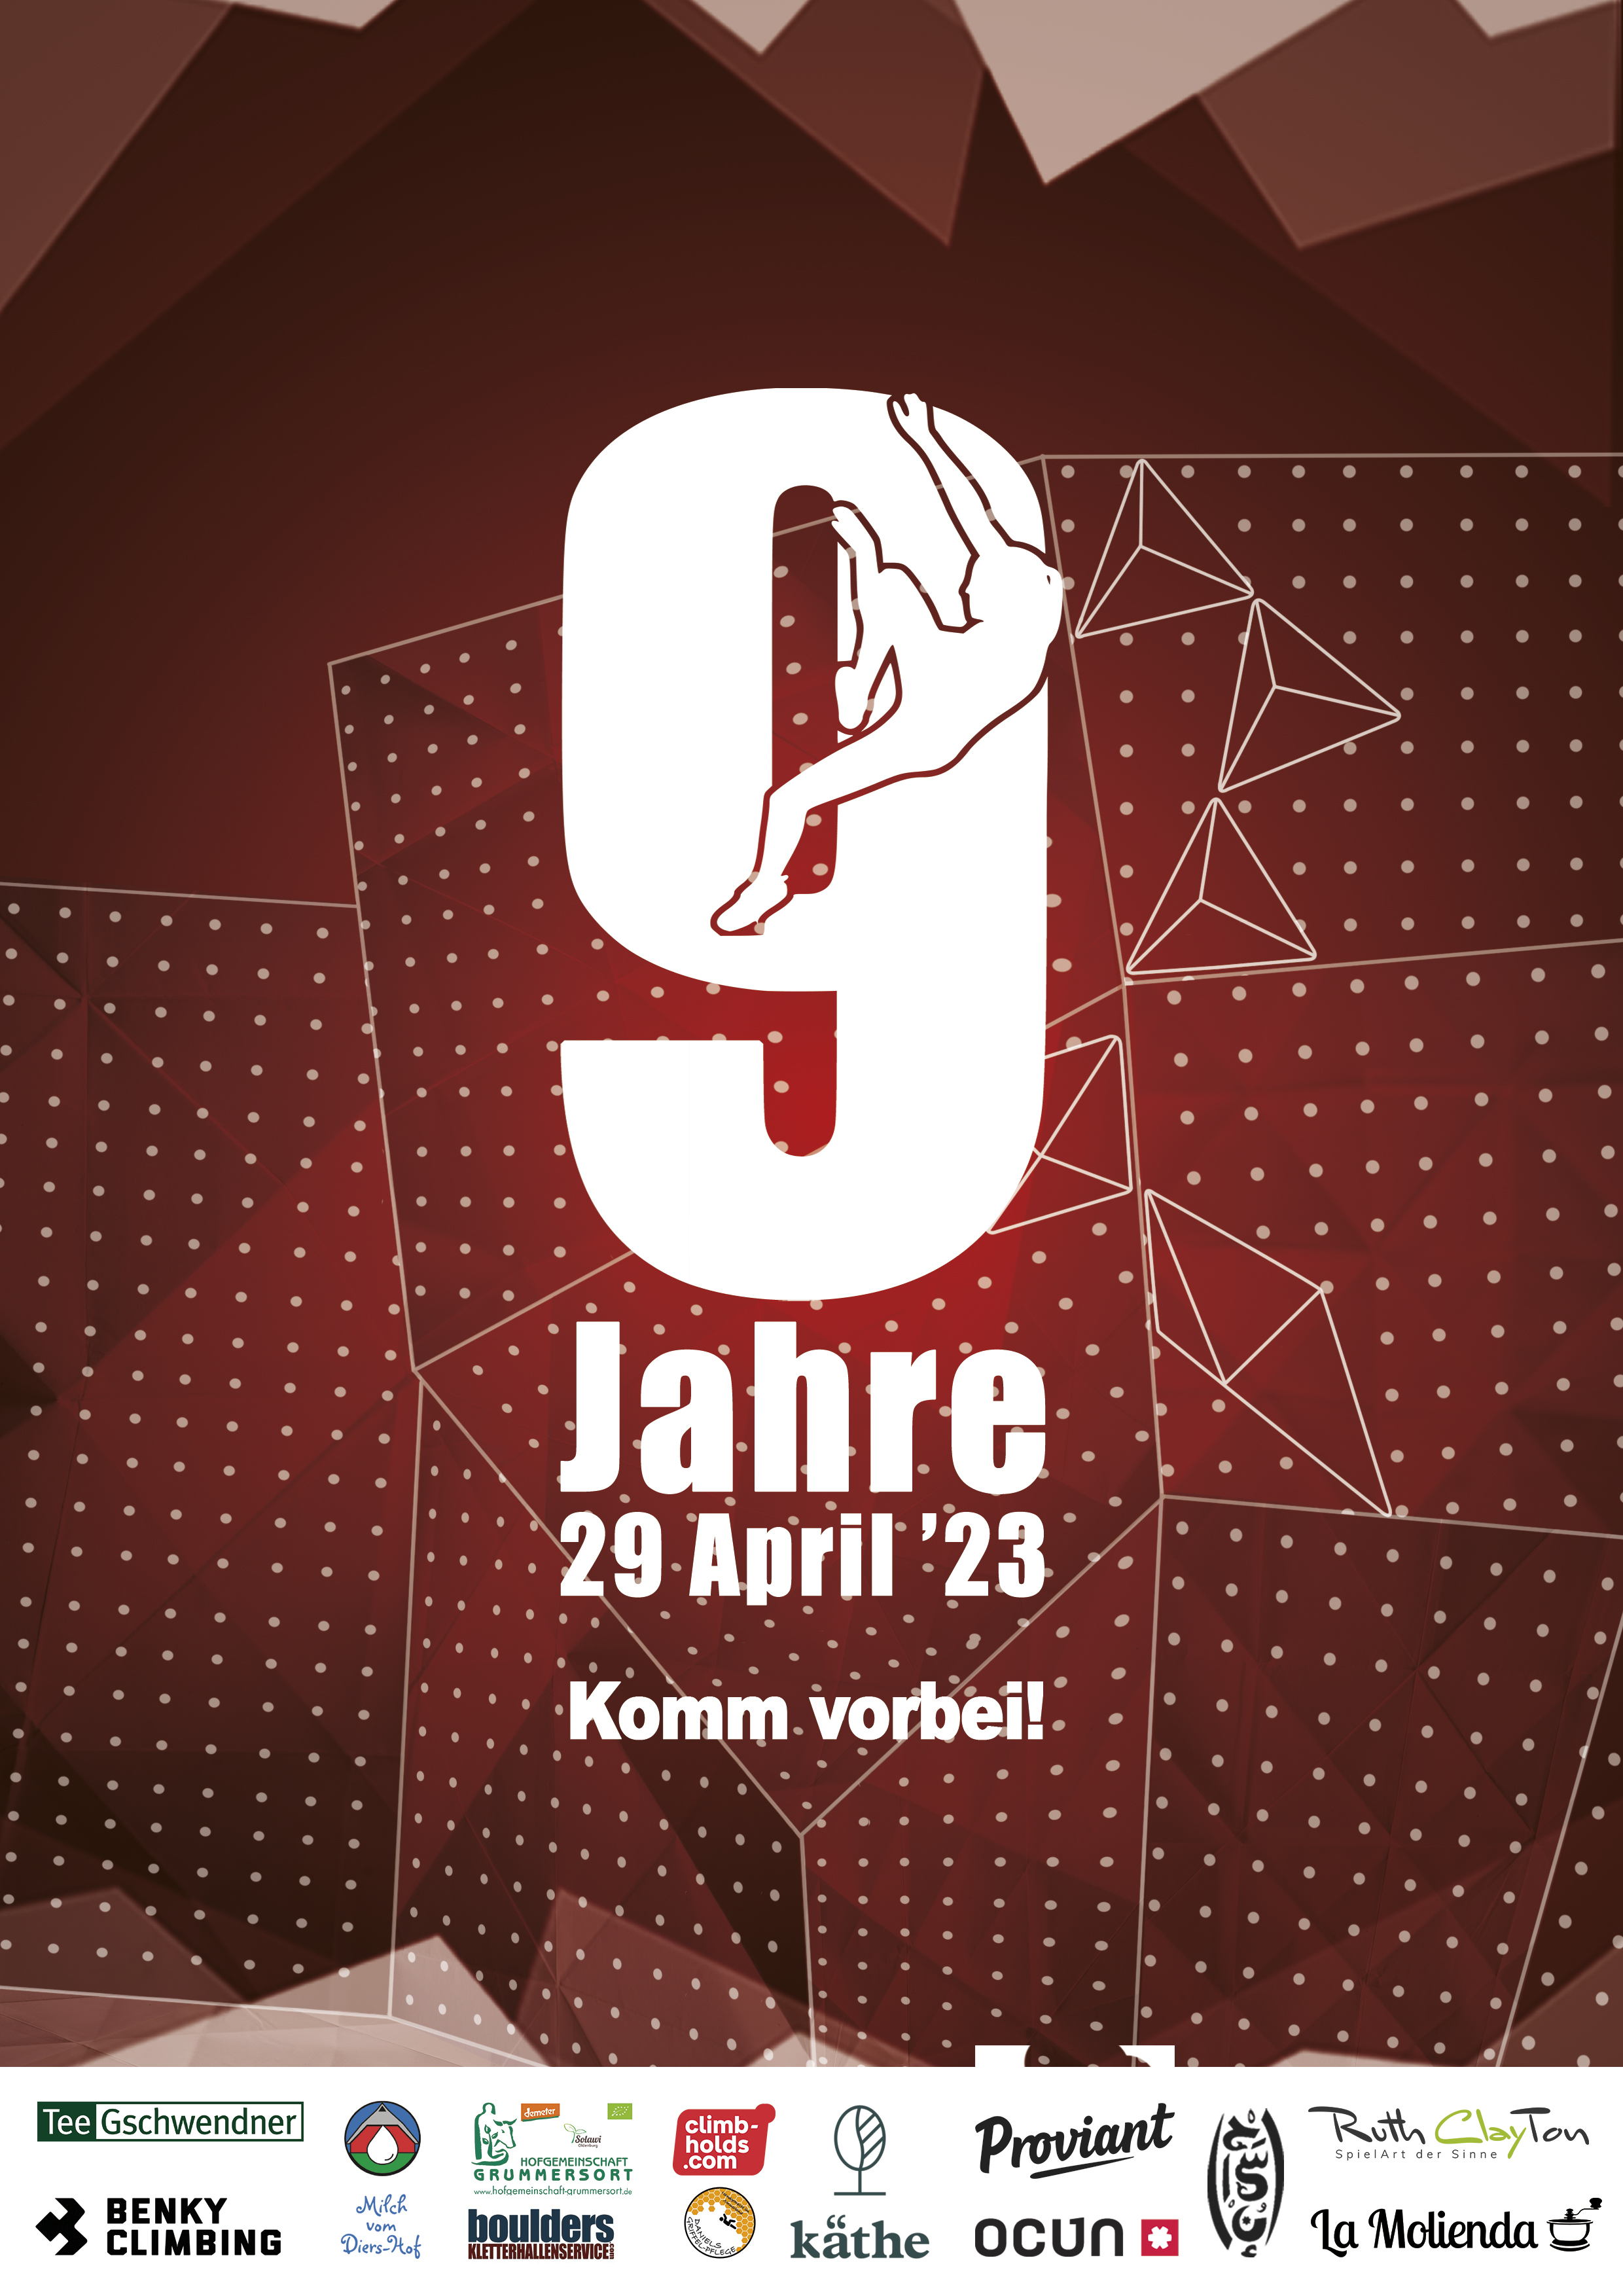 Poster for 9 Jahre Oldenbloc